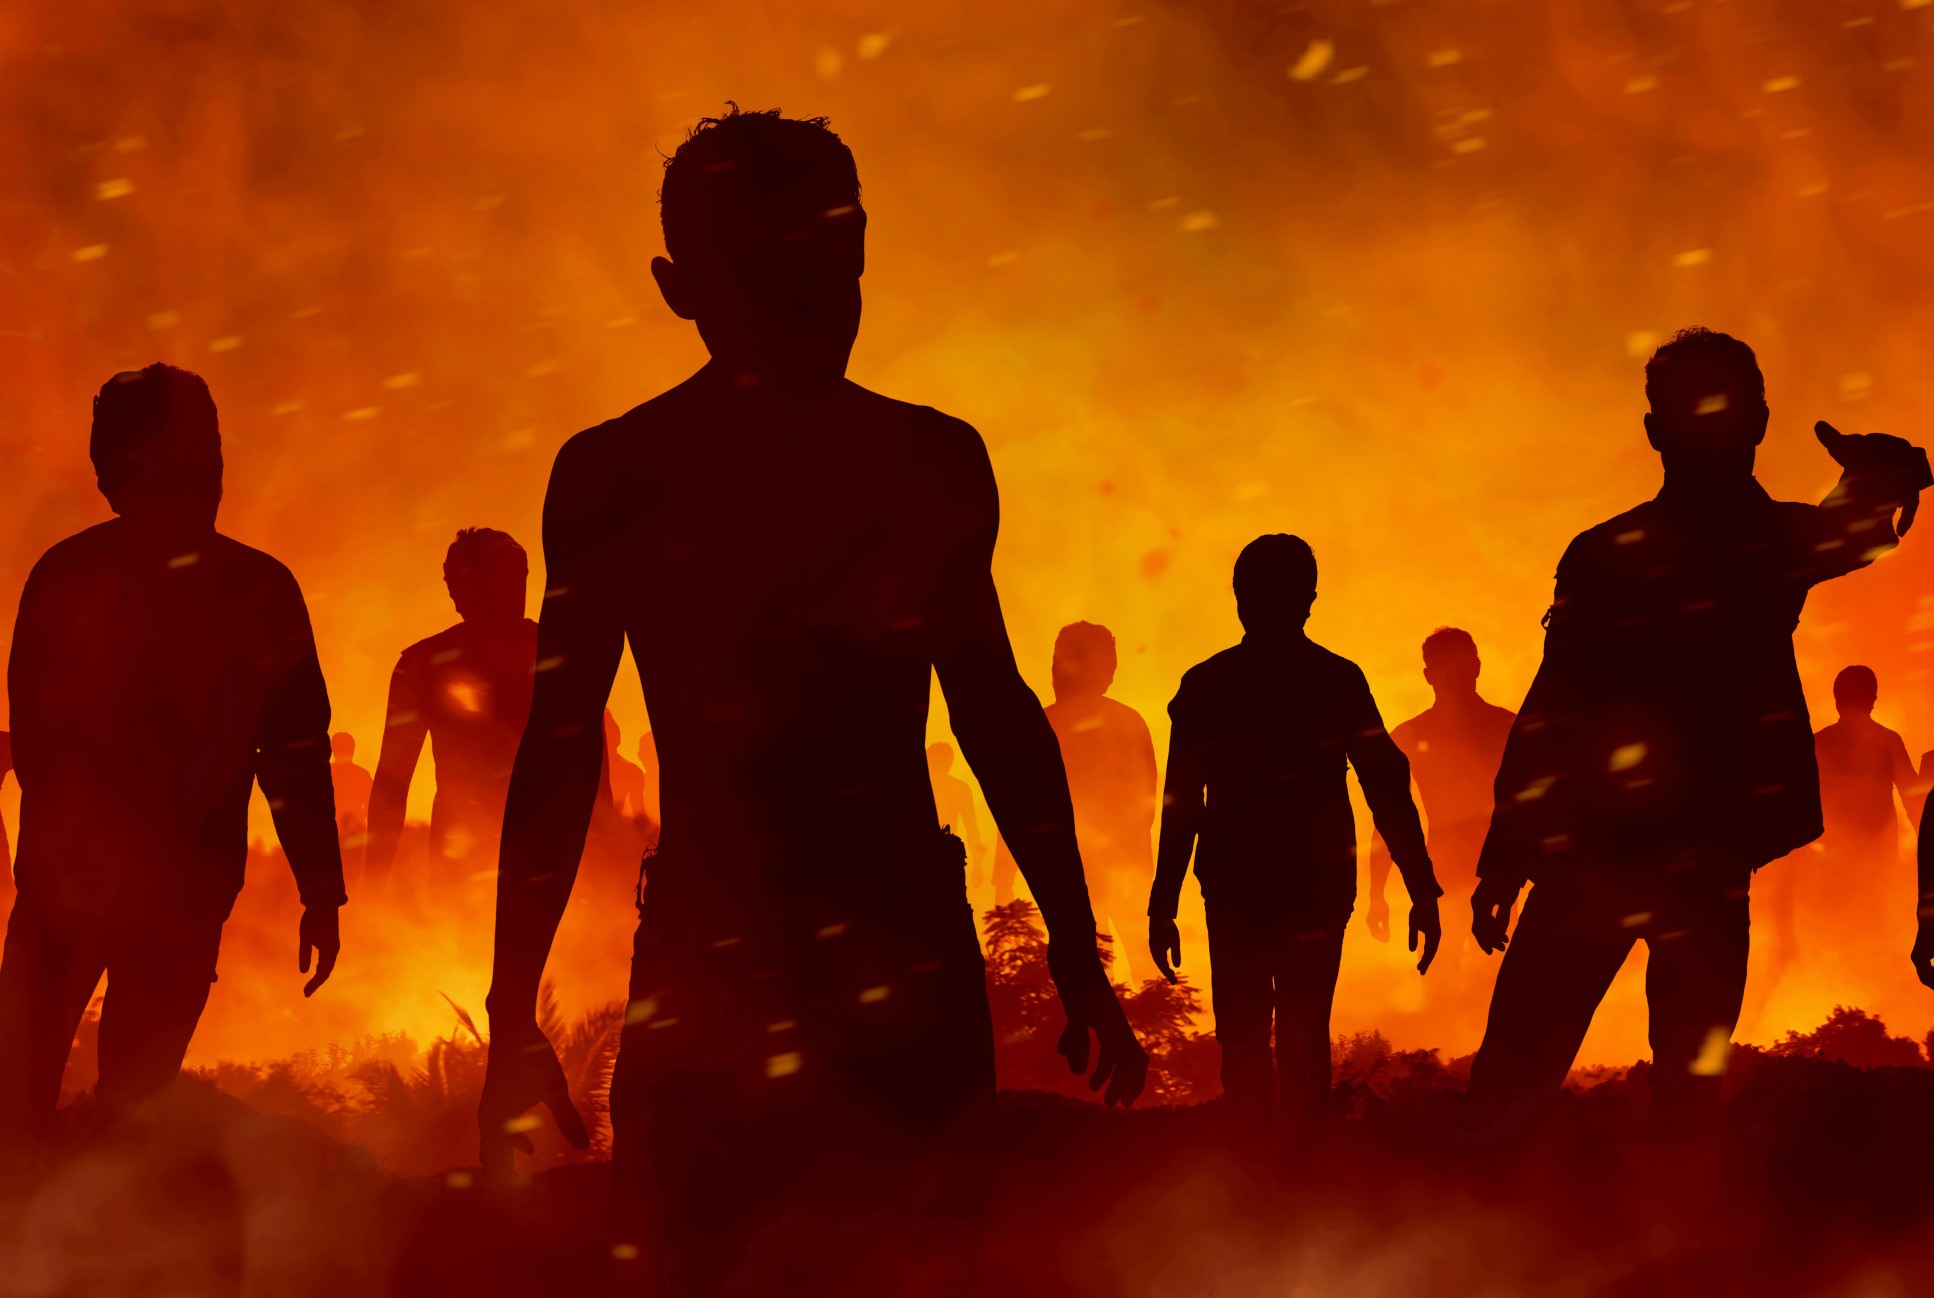 Zombies in silhouette against a firey backdrop 